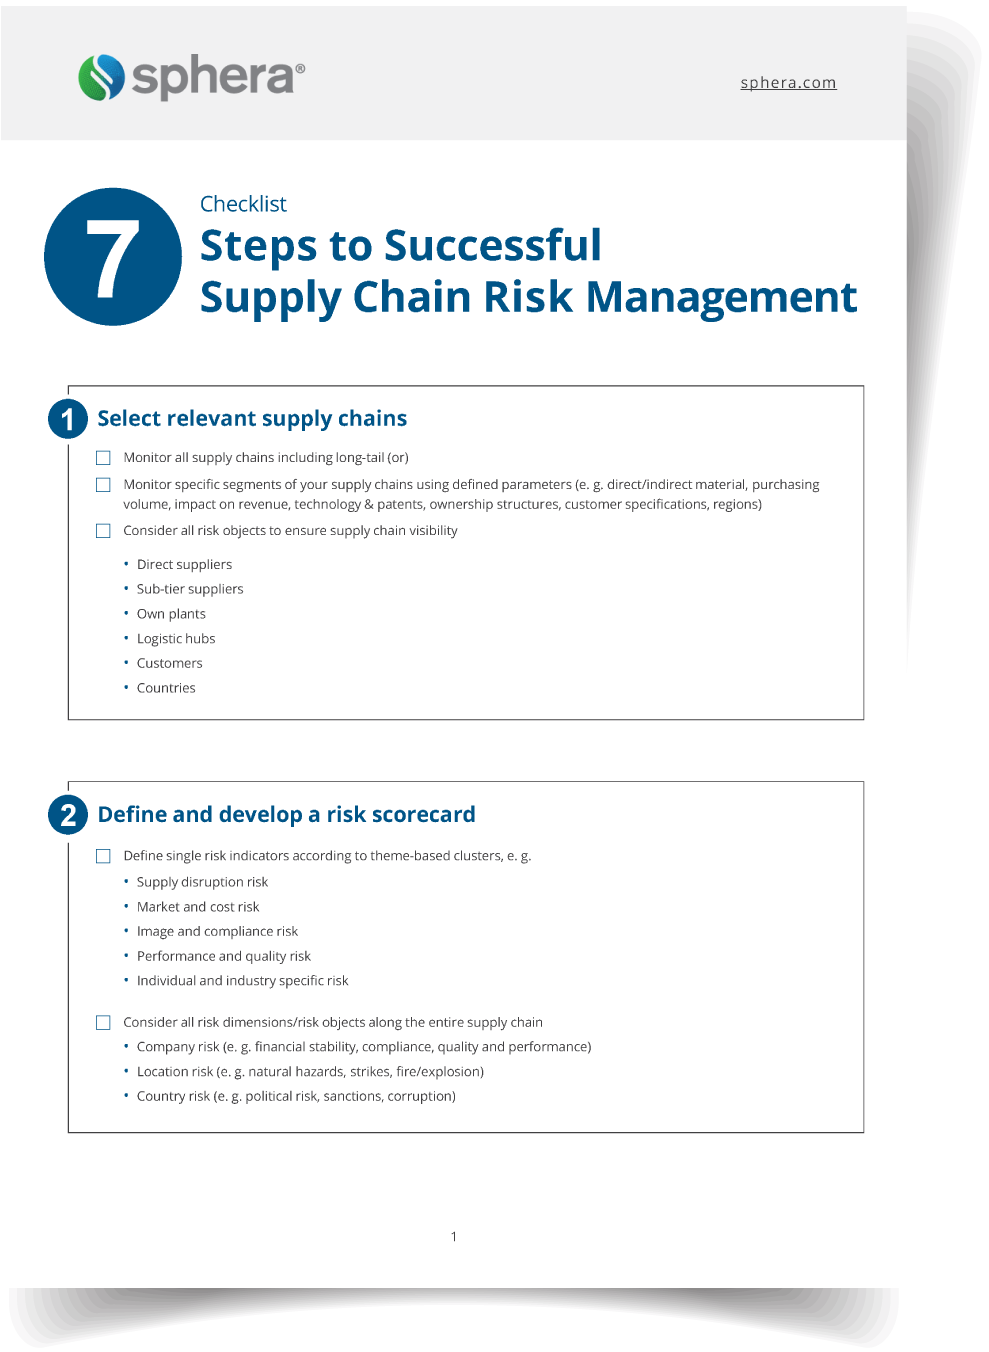 Checklist: 7 Steps to Successful Supply Chain Risk Management